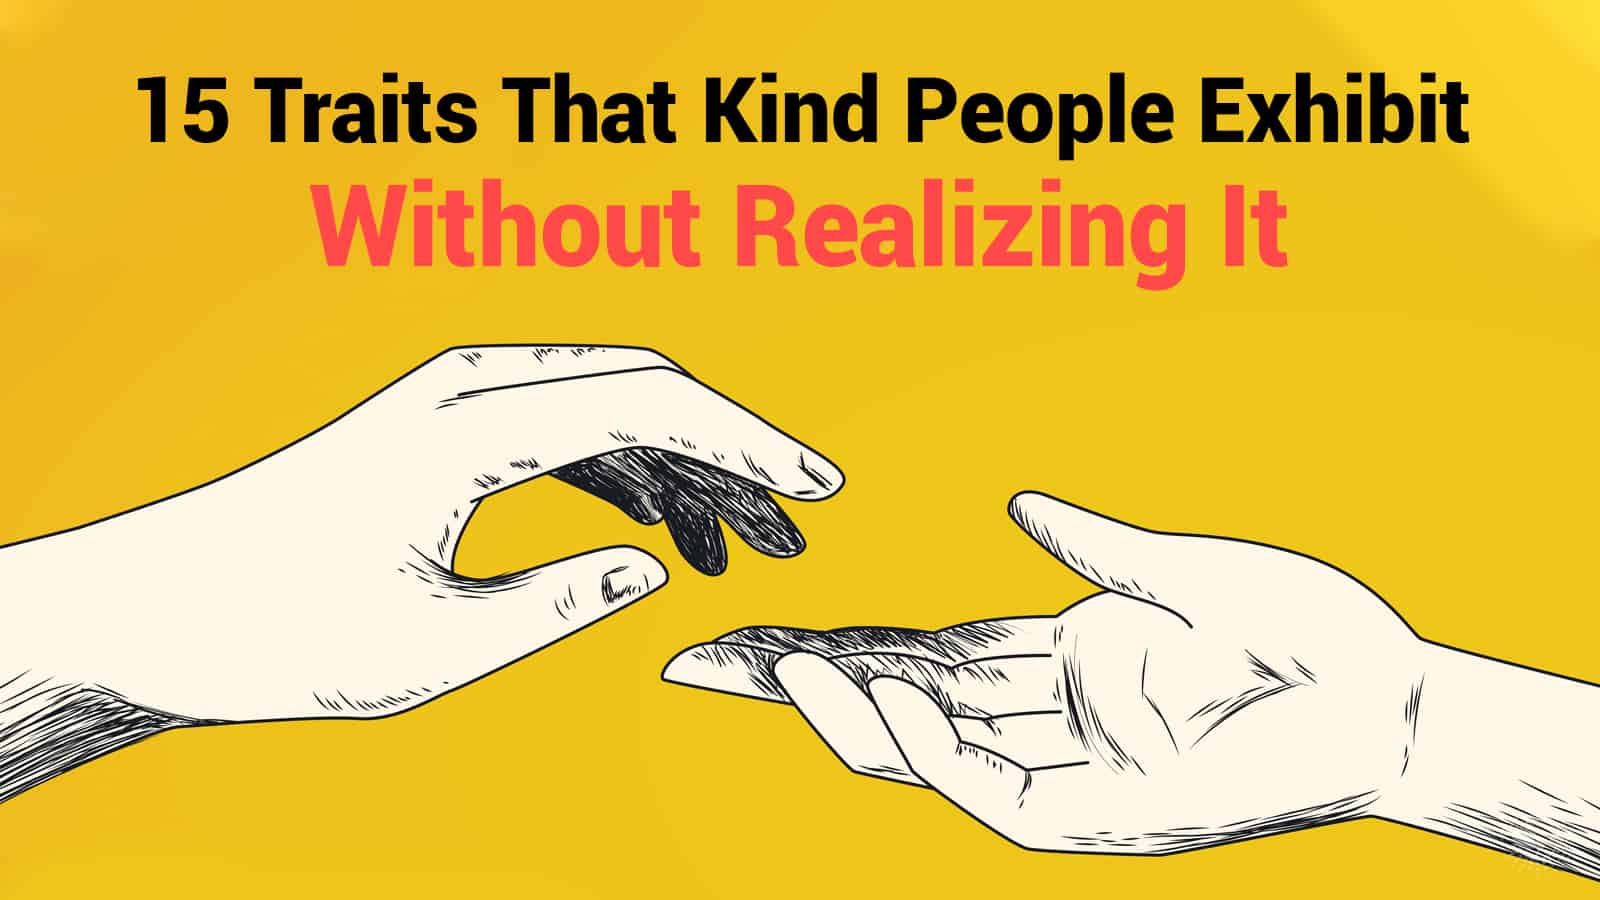 15 Traits That Kind People Exhibit Without Realizing It